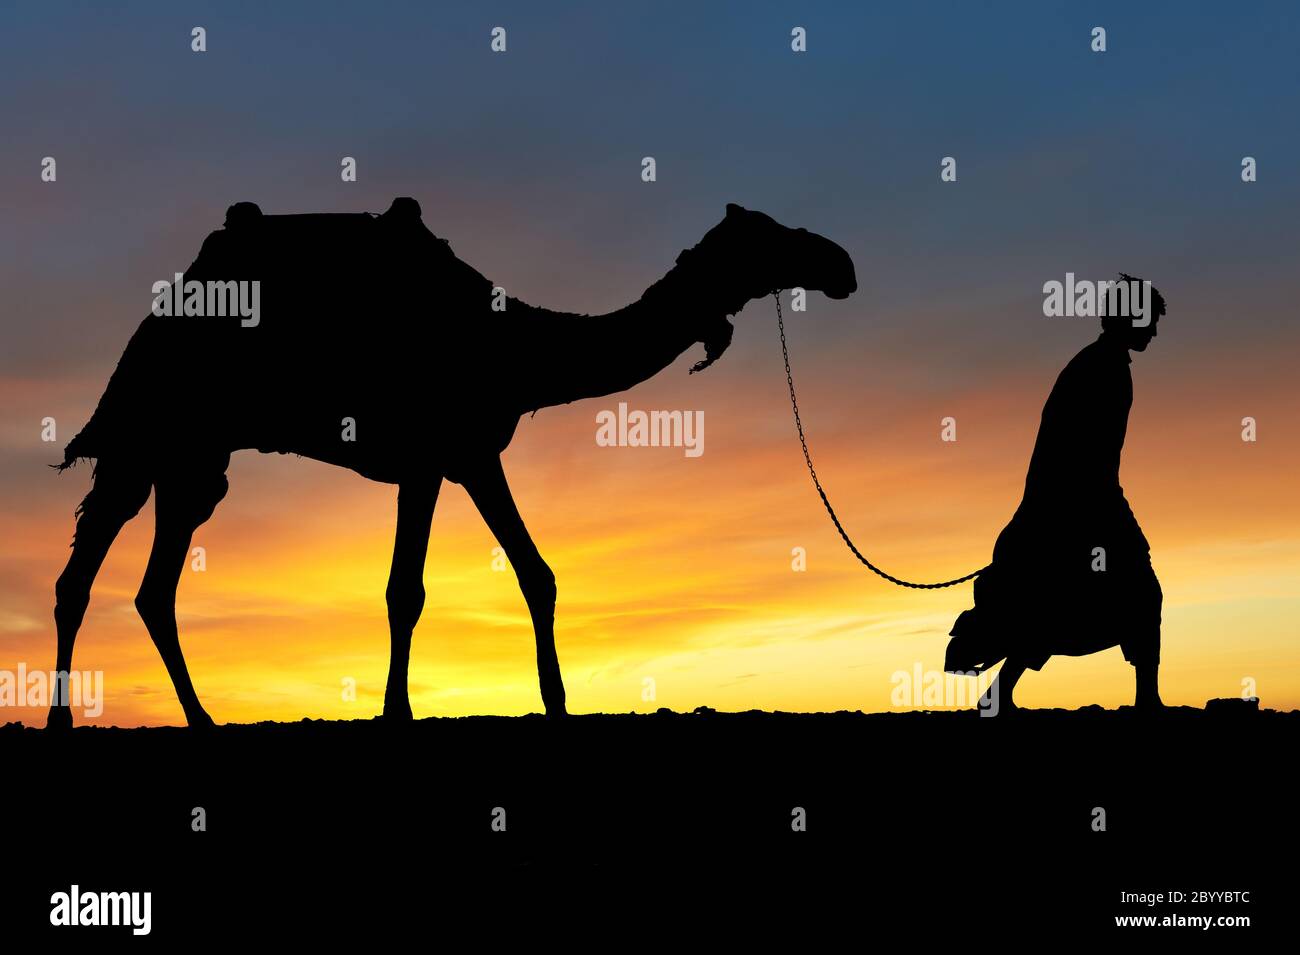 Silhouette of Arab with camel at sunrise Stock Photo